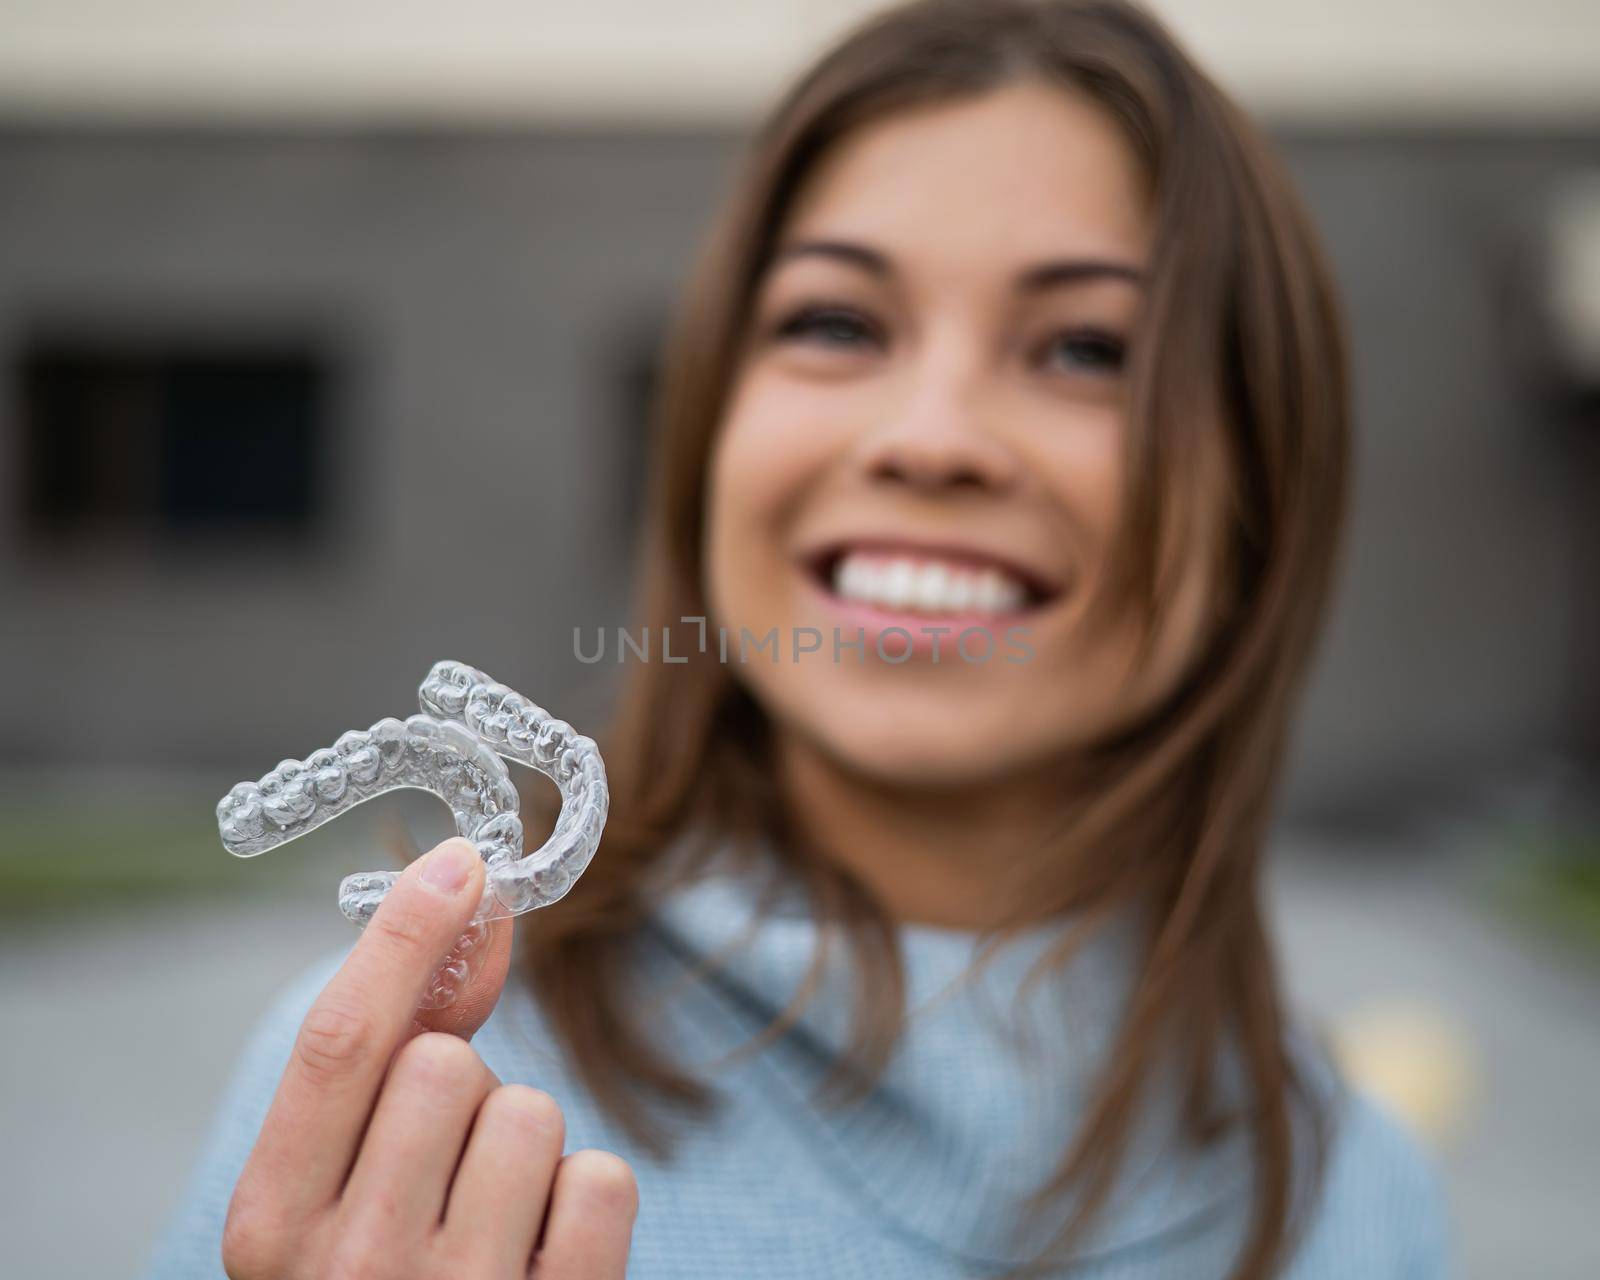 Caucasian woman with white smile holding transparent removable retainer. Bite correction device